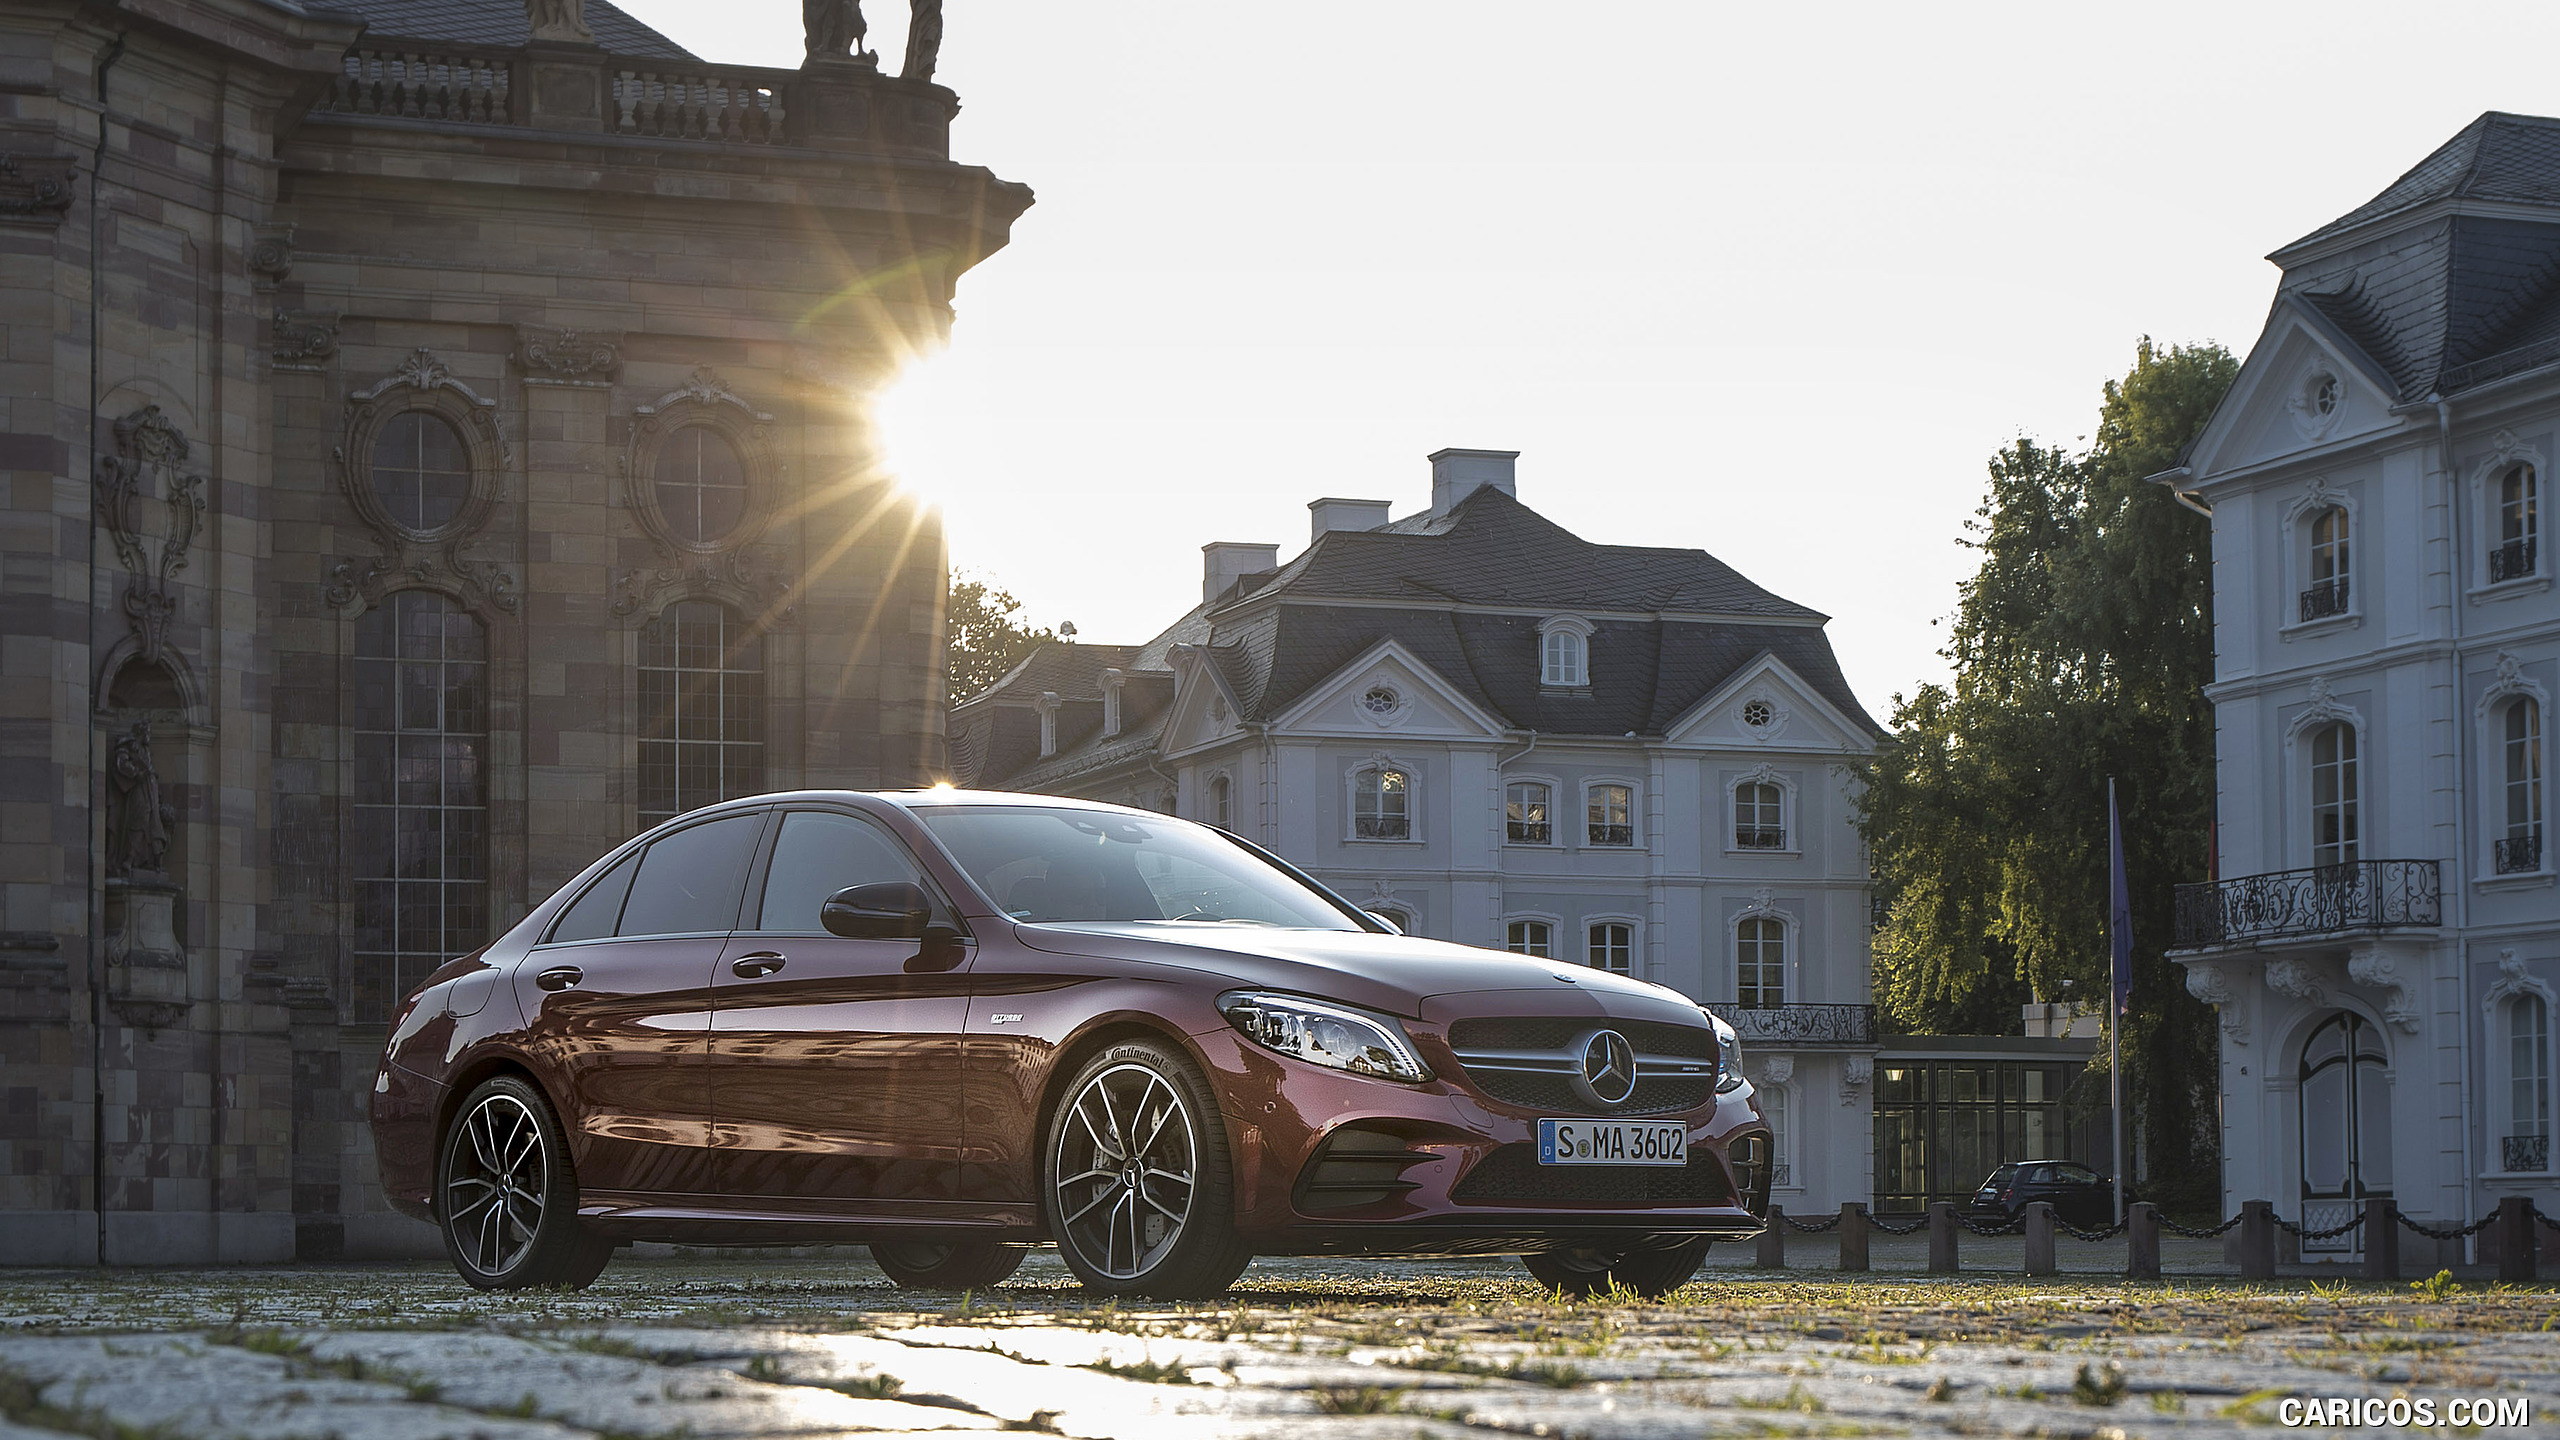 2019 Mercedes-AMG C43 4MATIC Sedan (Color: Hyacinth Red) - Front Three-Quarter, #57 of 192